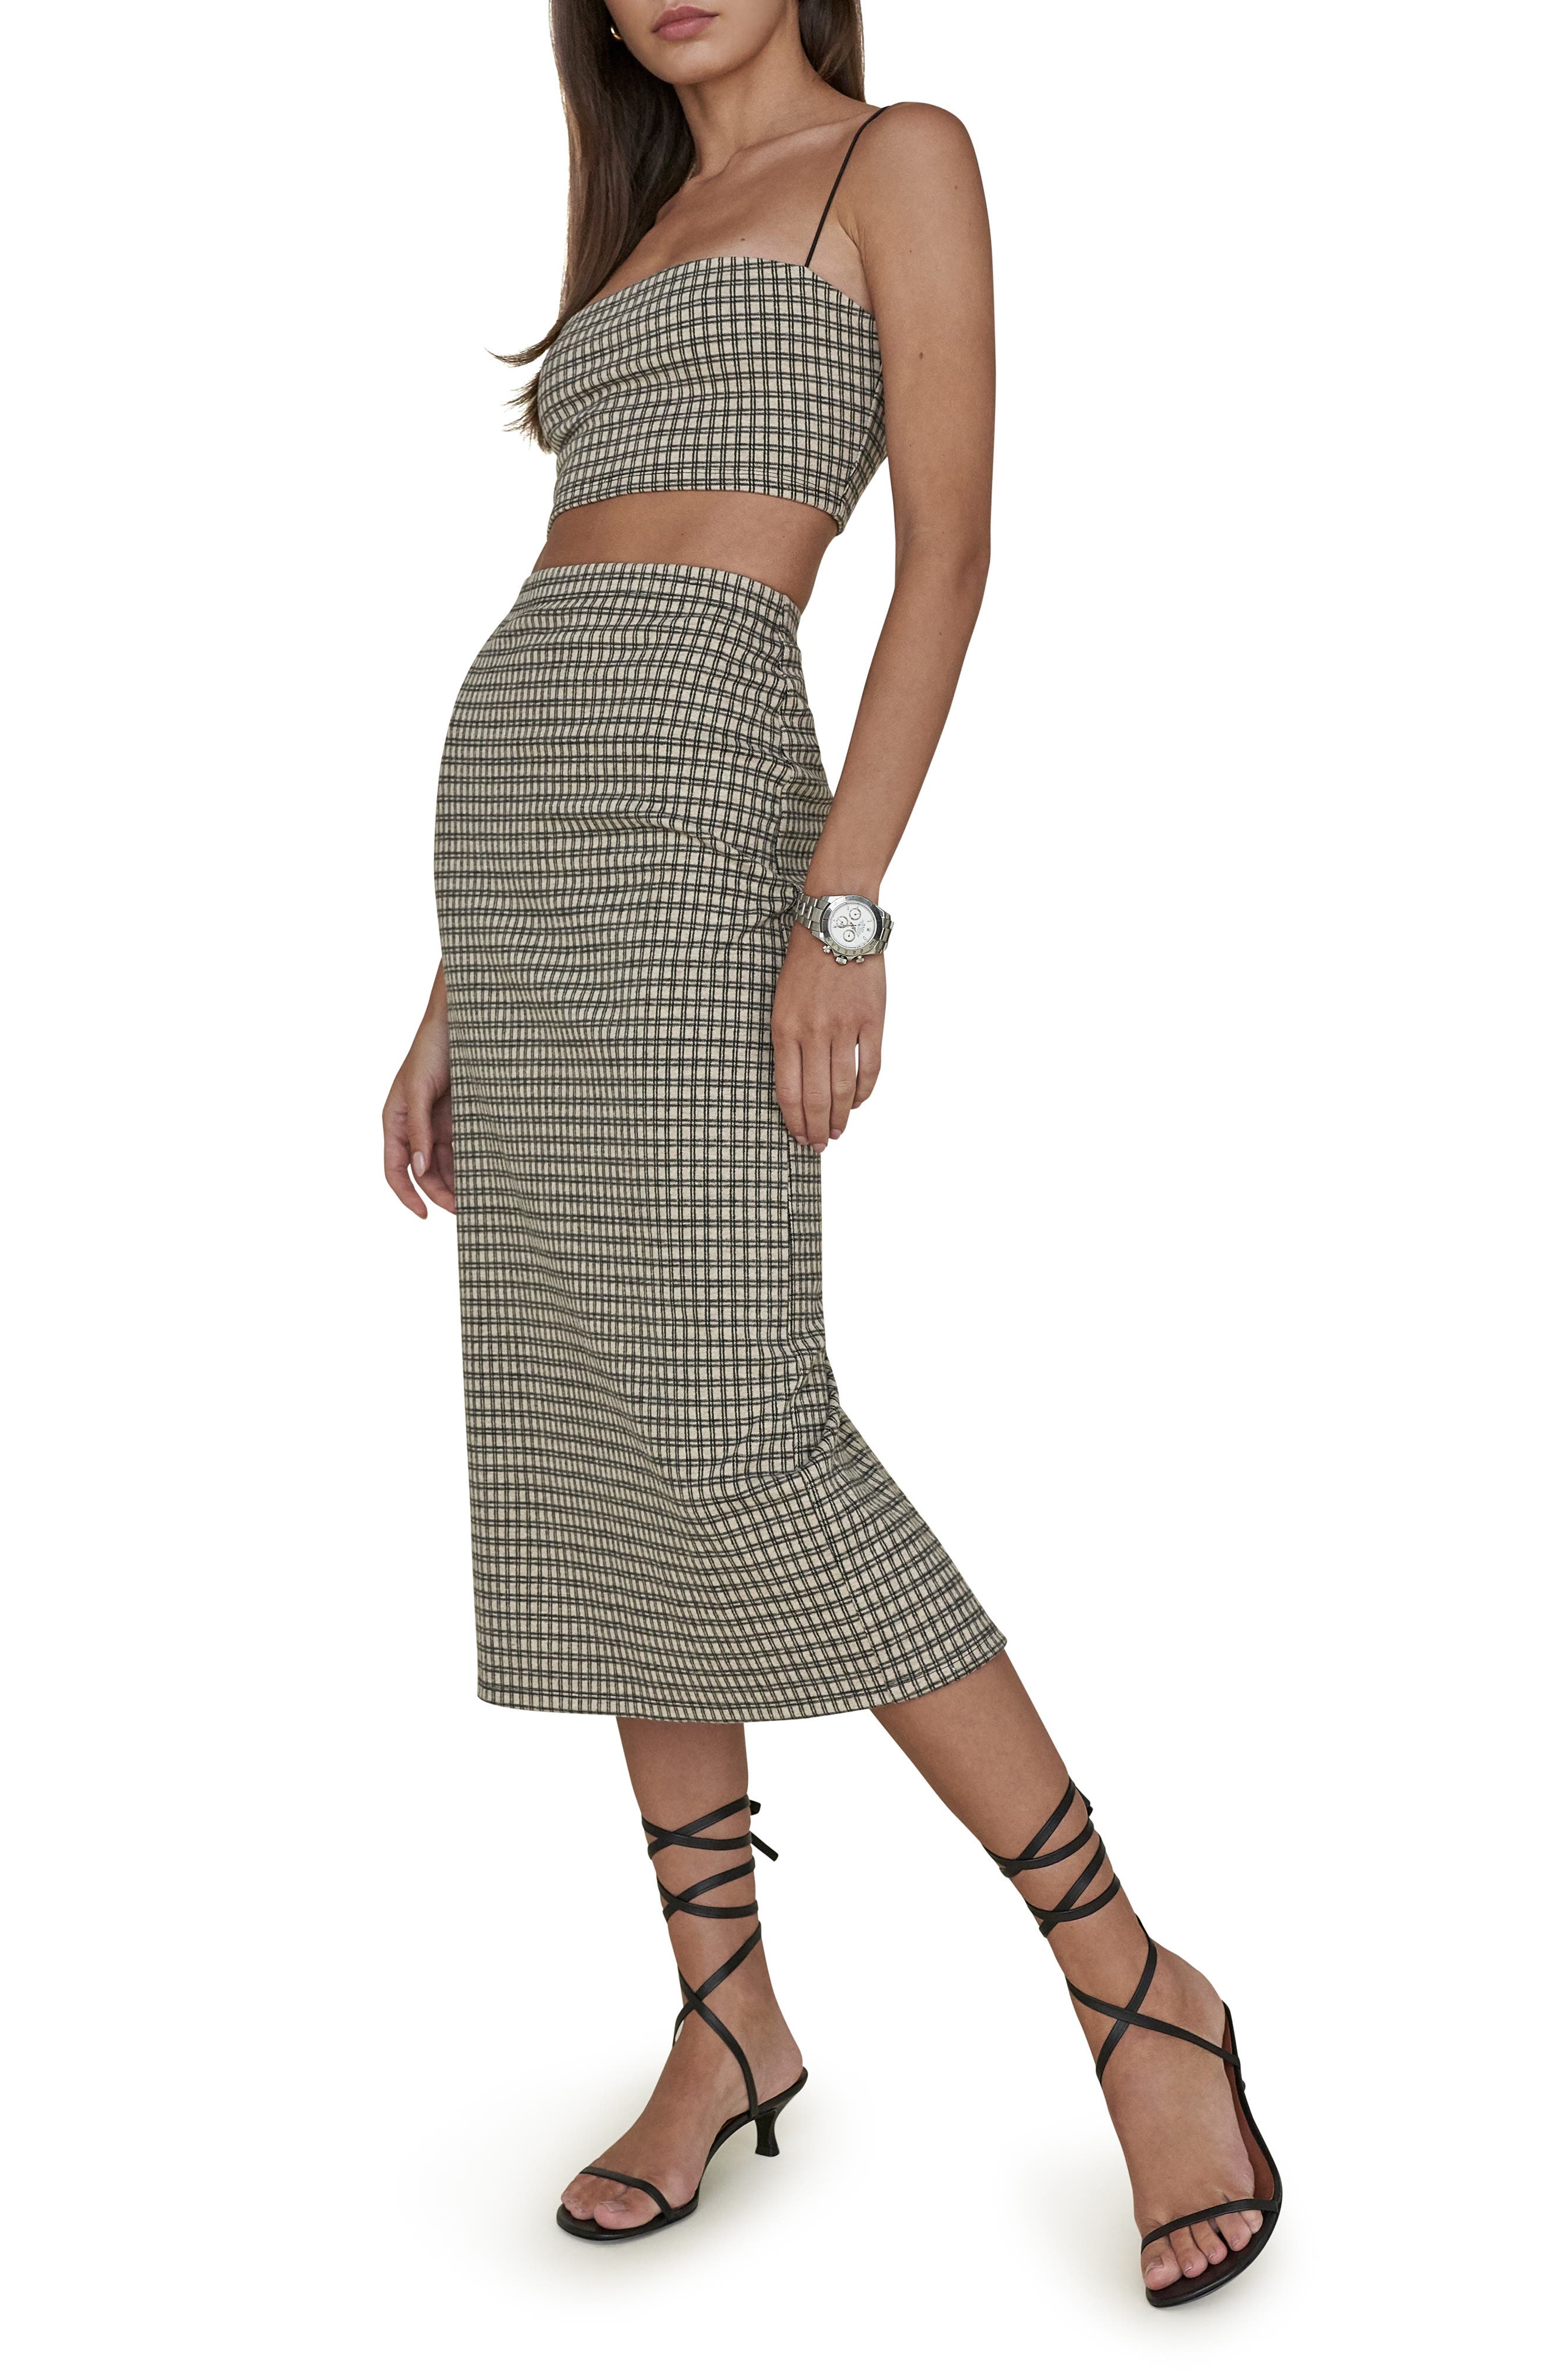 Reformation Callista Two-Piece Dress in Beige Check at Nordstrom, Size Large